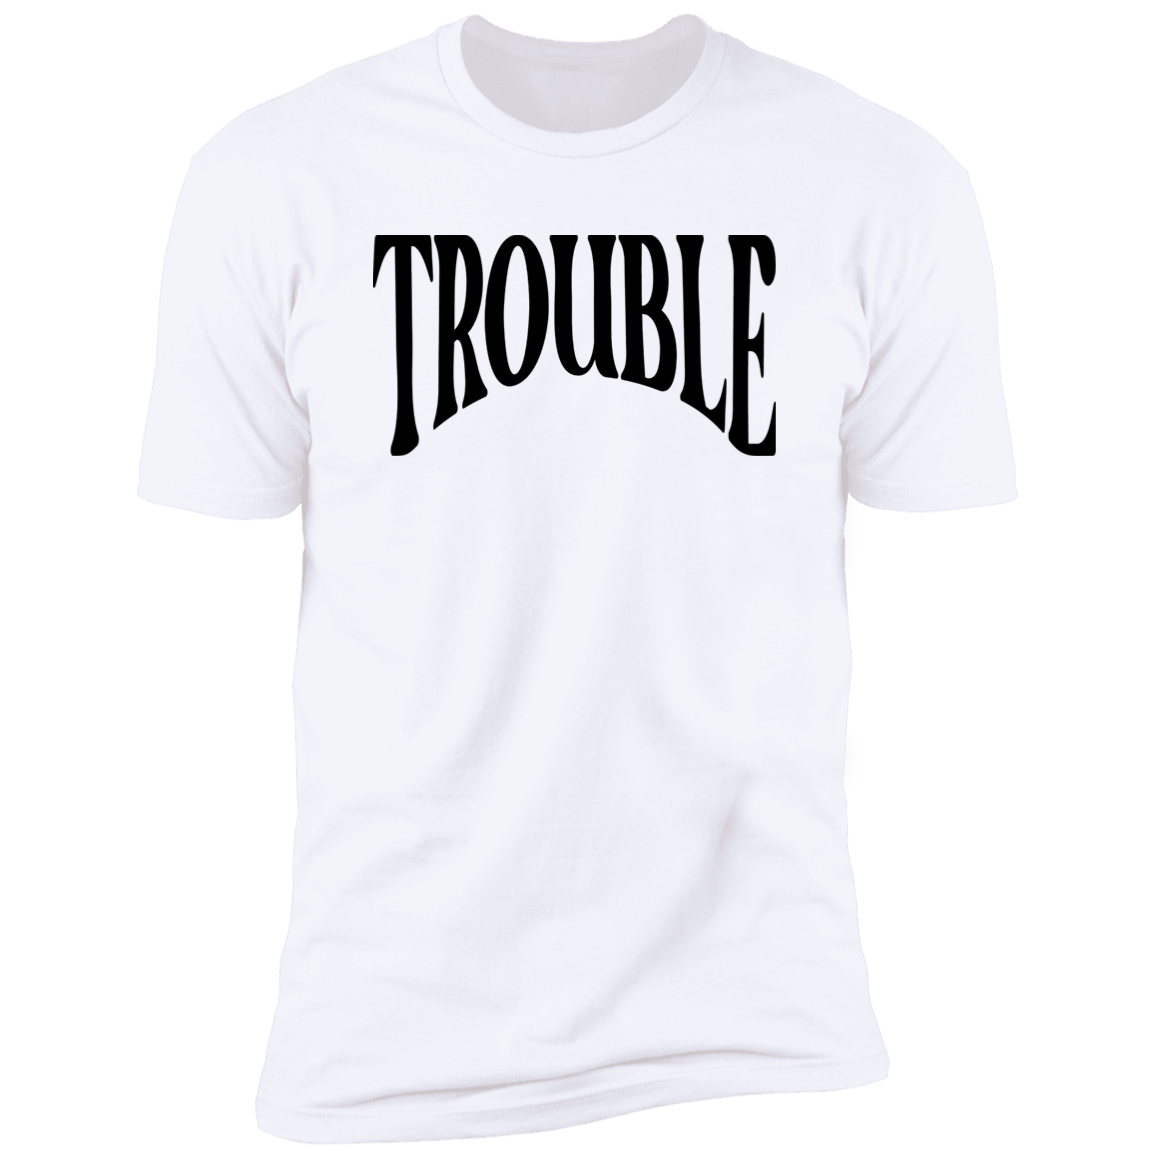 Where I Go Trouble Follows &amp; Trouble Deluxe Tees